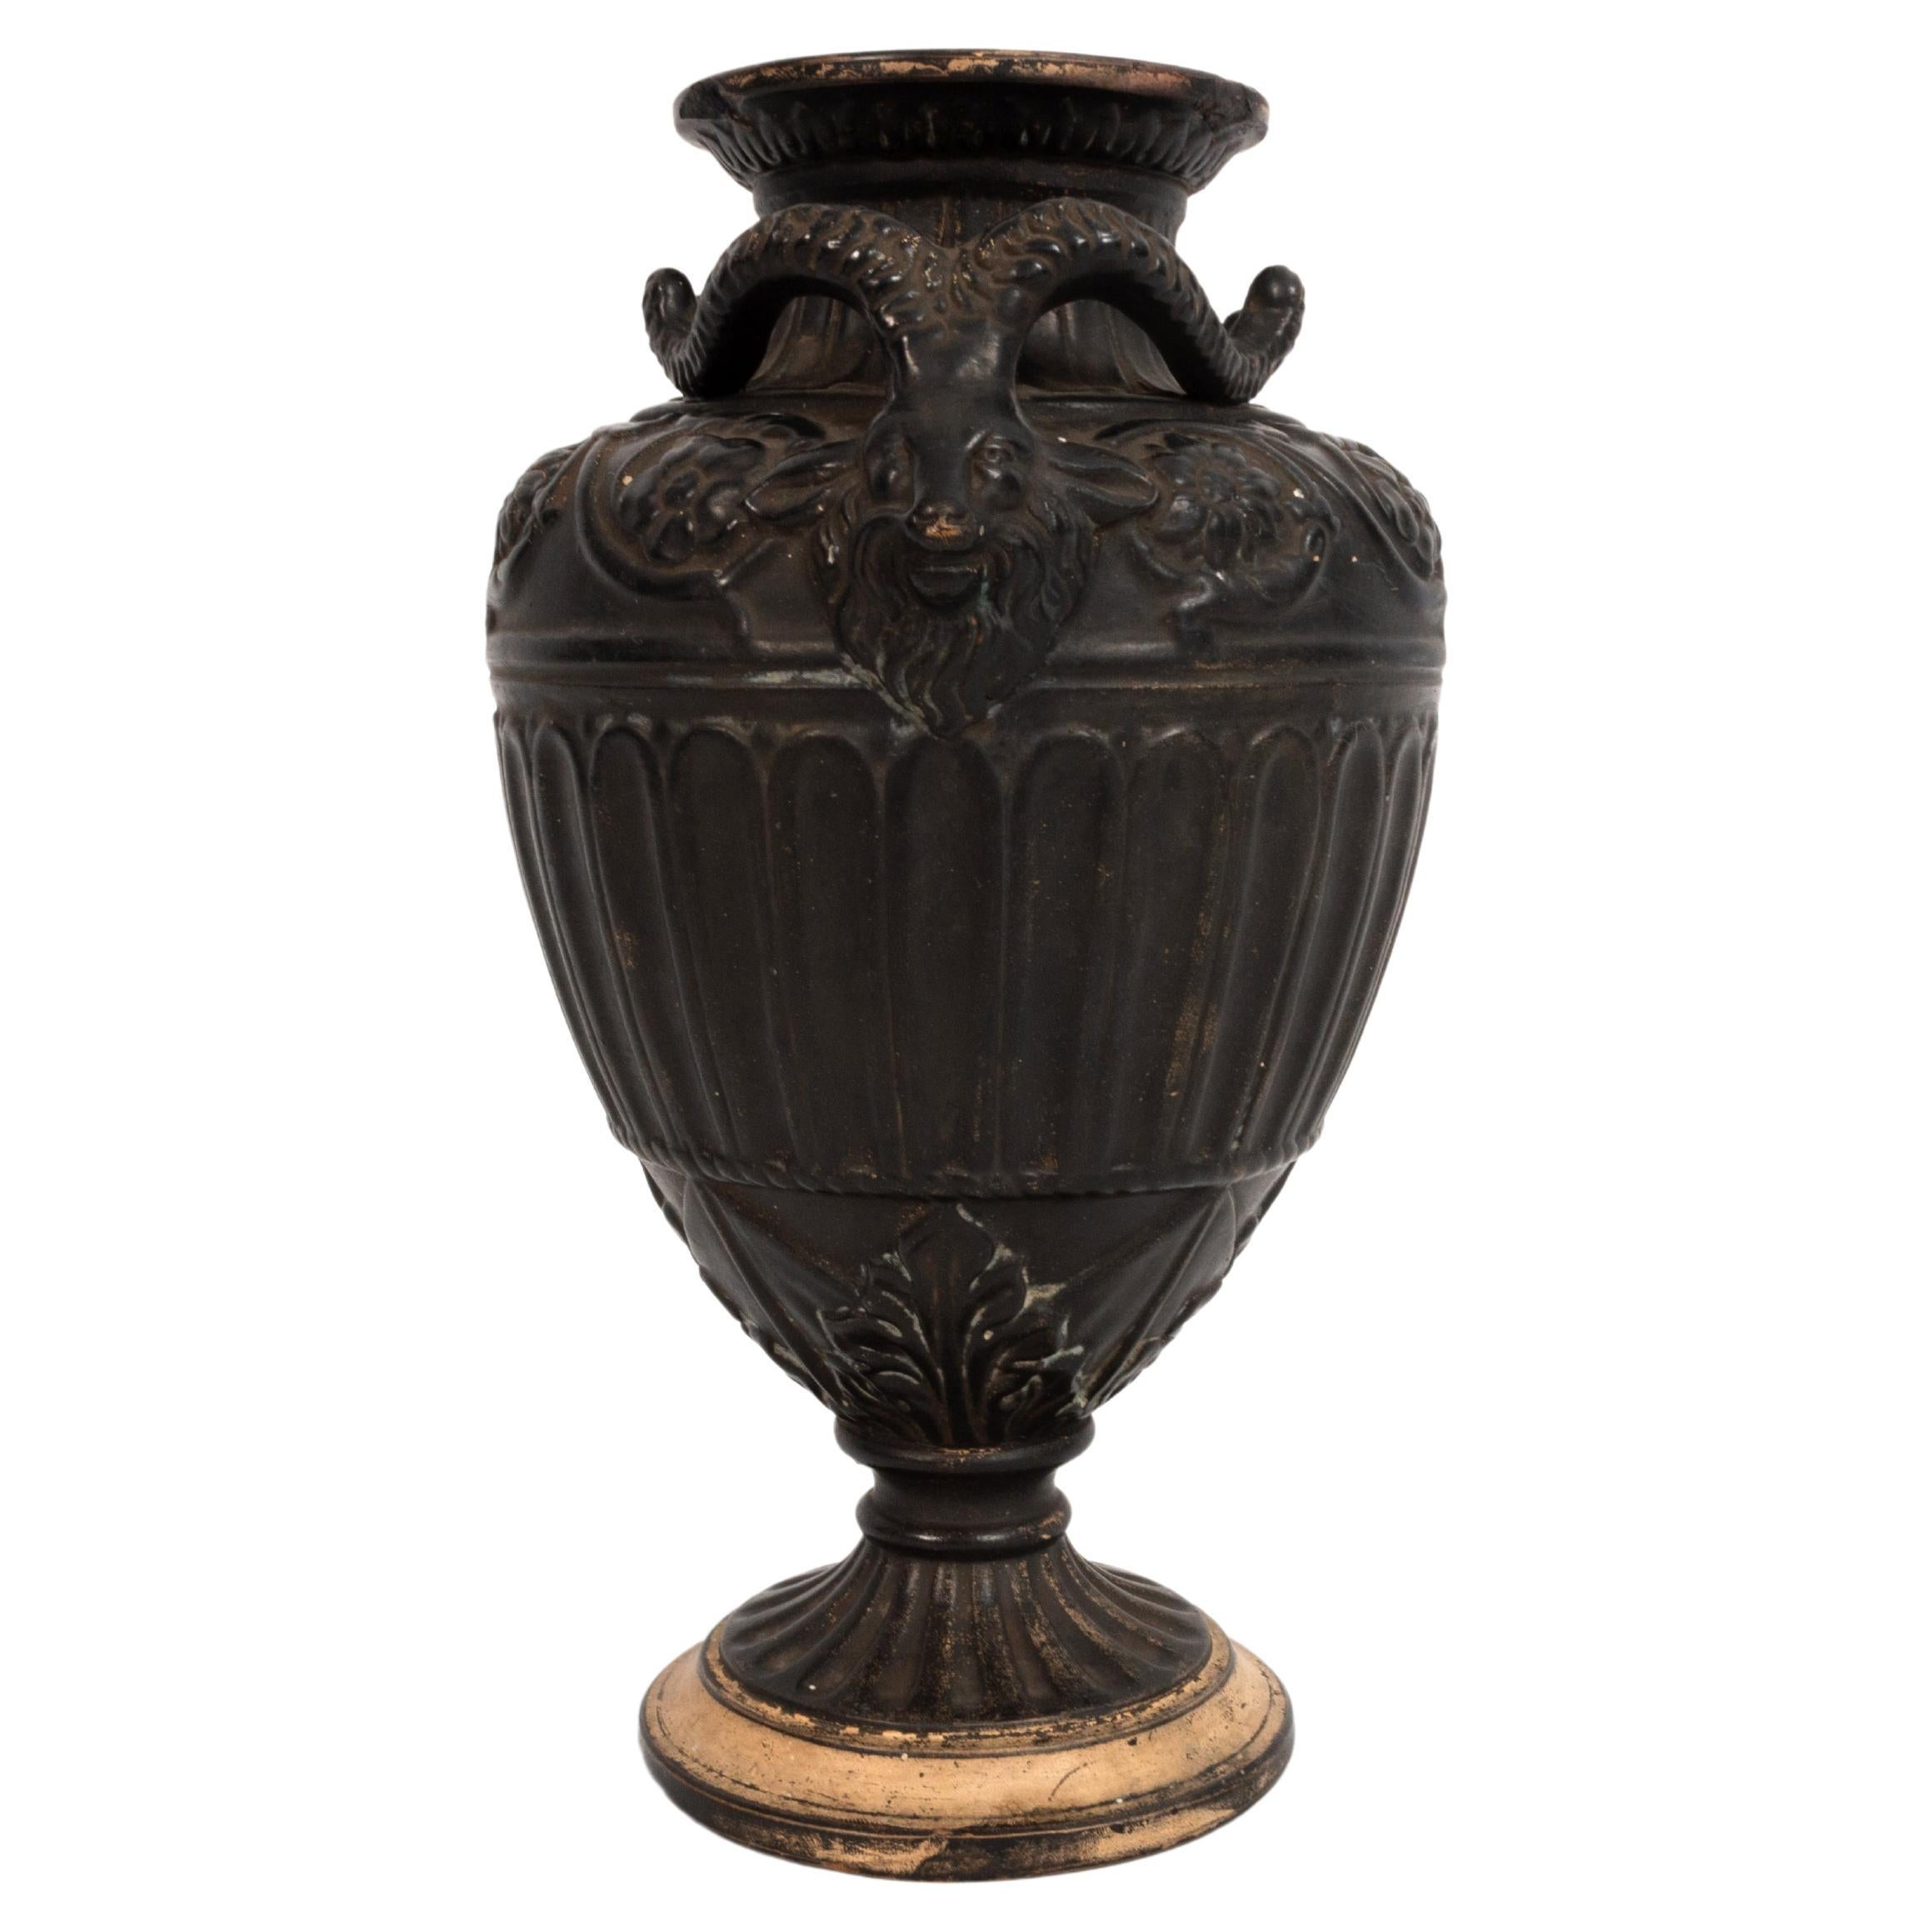 Antique 19th Century Neoclassical Vase By Gerbing & Stephan, Germany, 1892 For Sale